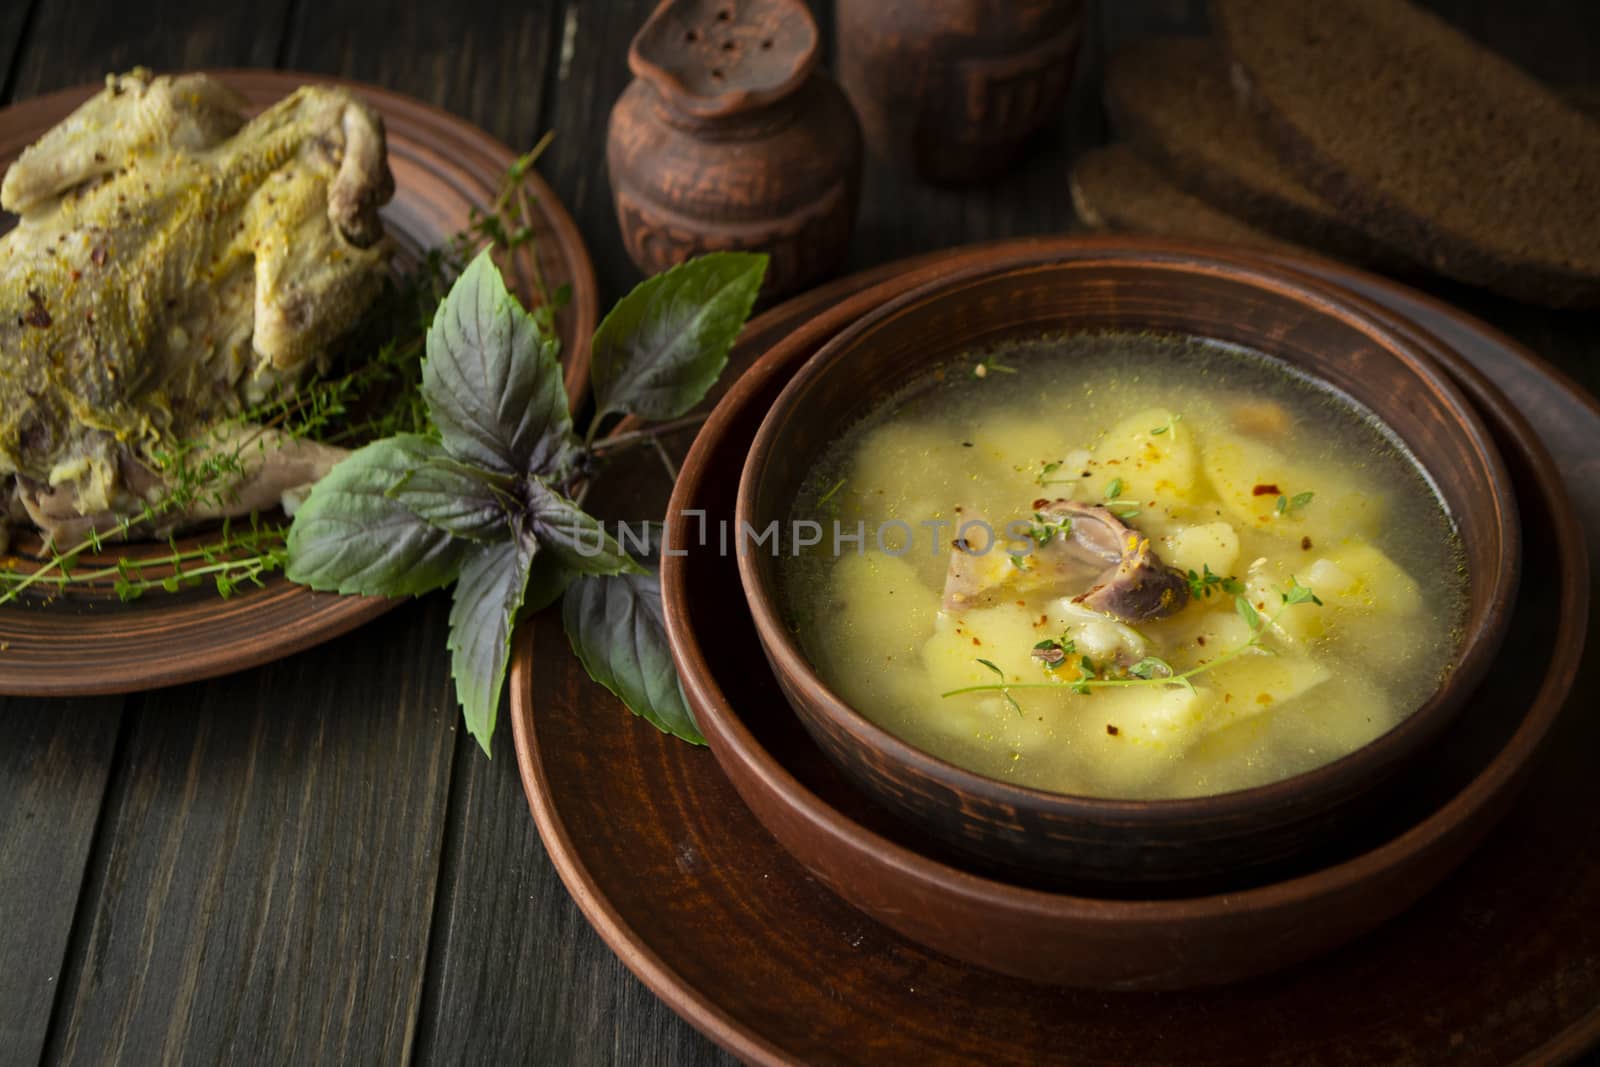 Partridge soup with basil in a rustic bowl on dark wooden table